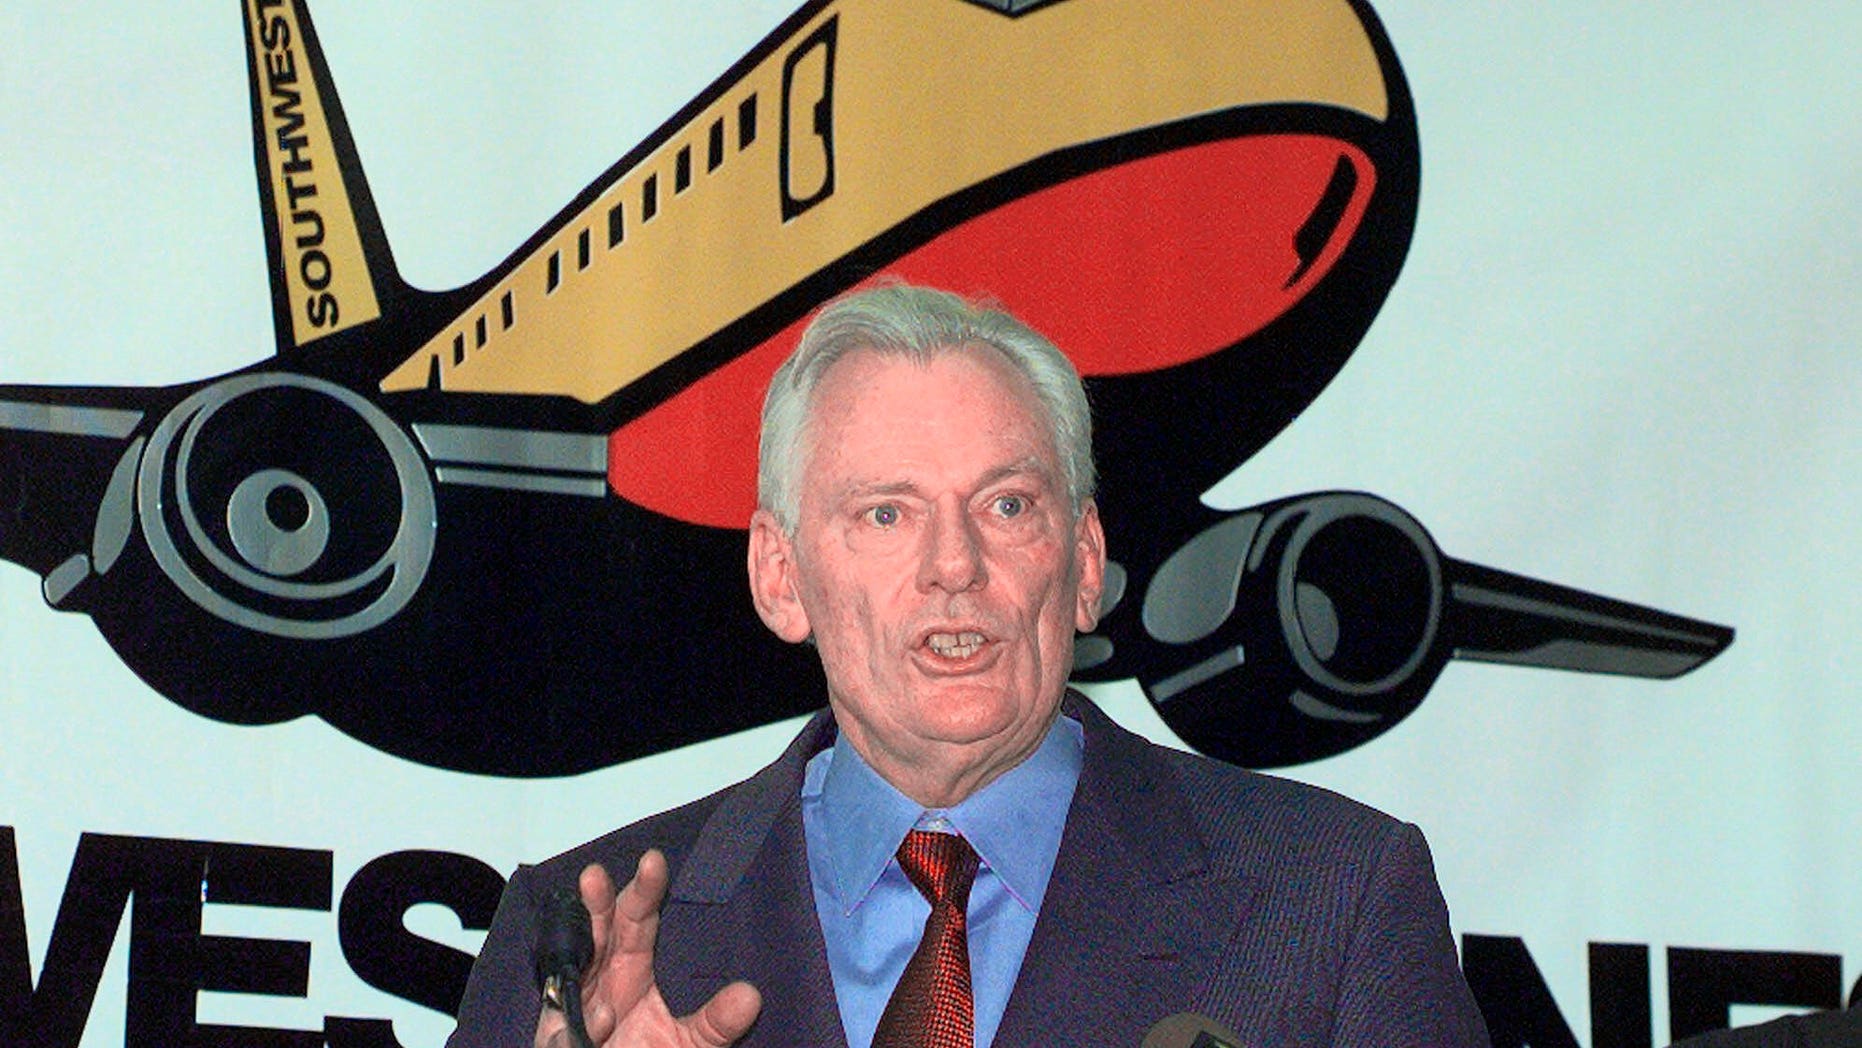 Southwest Airlines founder Herb Kelleher dead at 87